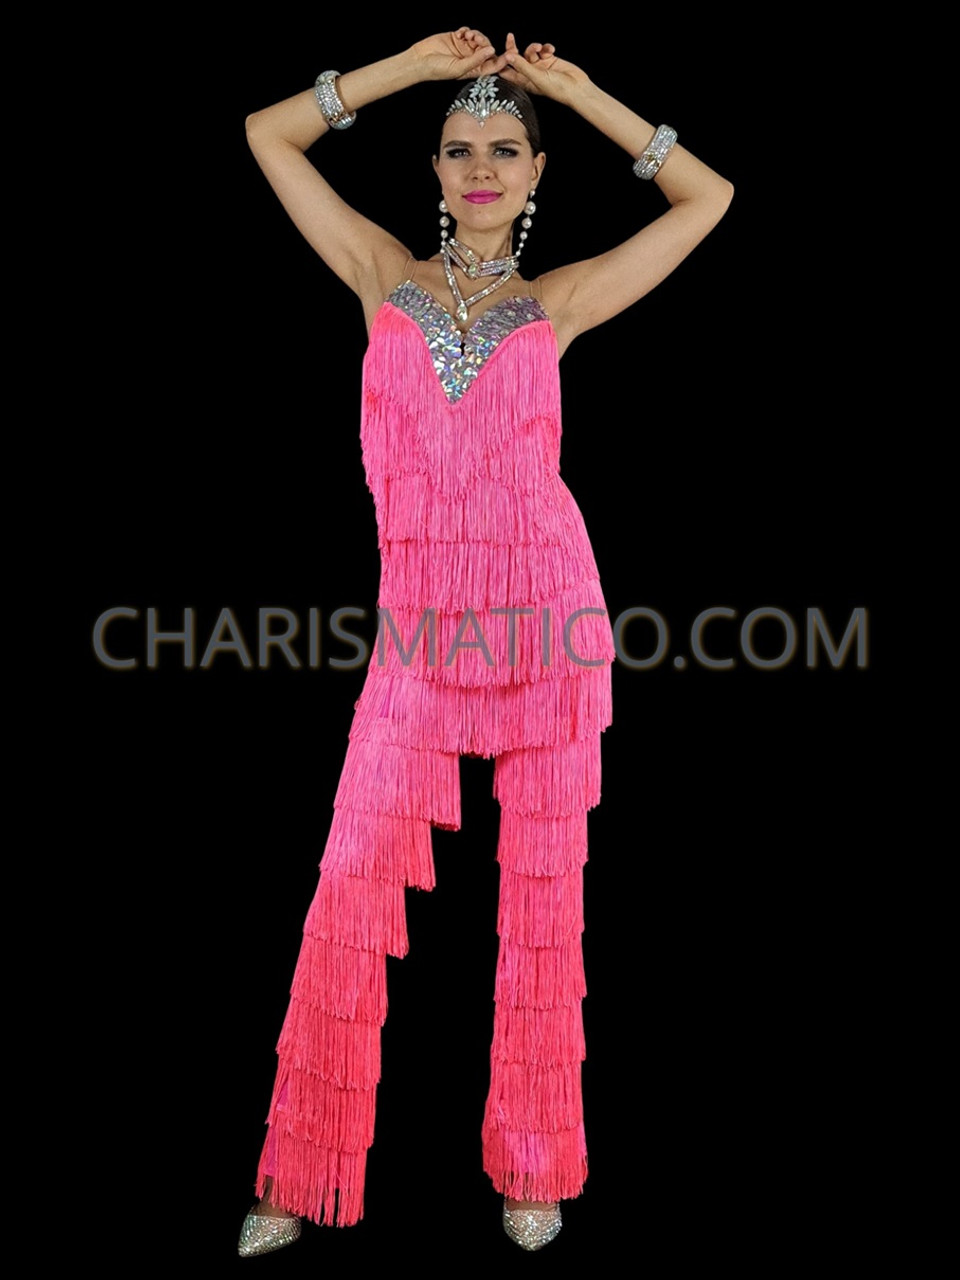 https://cdn11.bigcommerce.com/s-07991/images/stencil/1280x1280/products/6576/66228/PC1683_-_Latin_Dance_Inspired_Pink_Fringe_Pants_With_Rainbow_Sequin_Trim_6__33924.1624246840.jpg?c=2